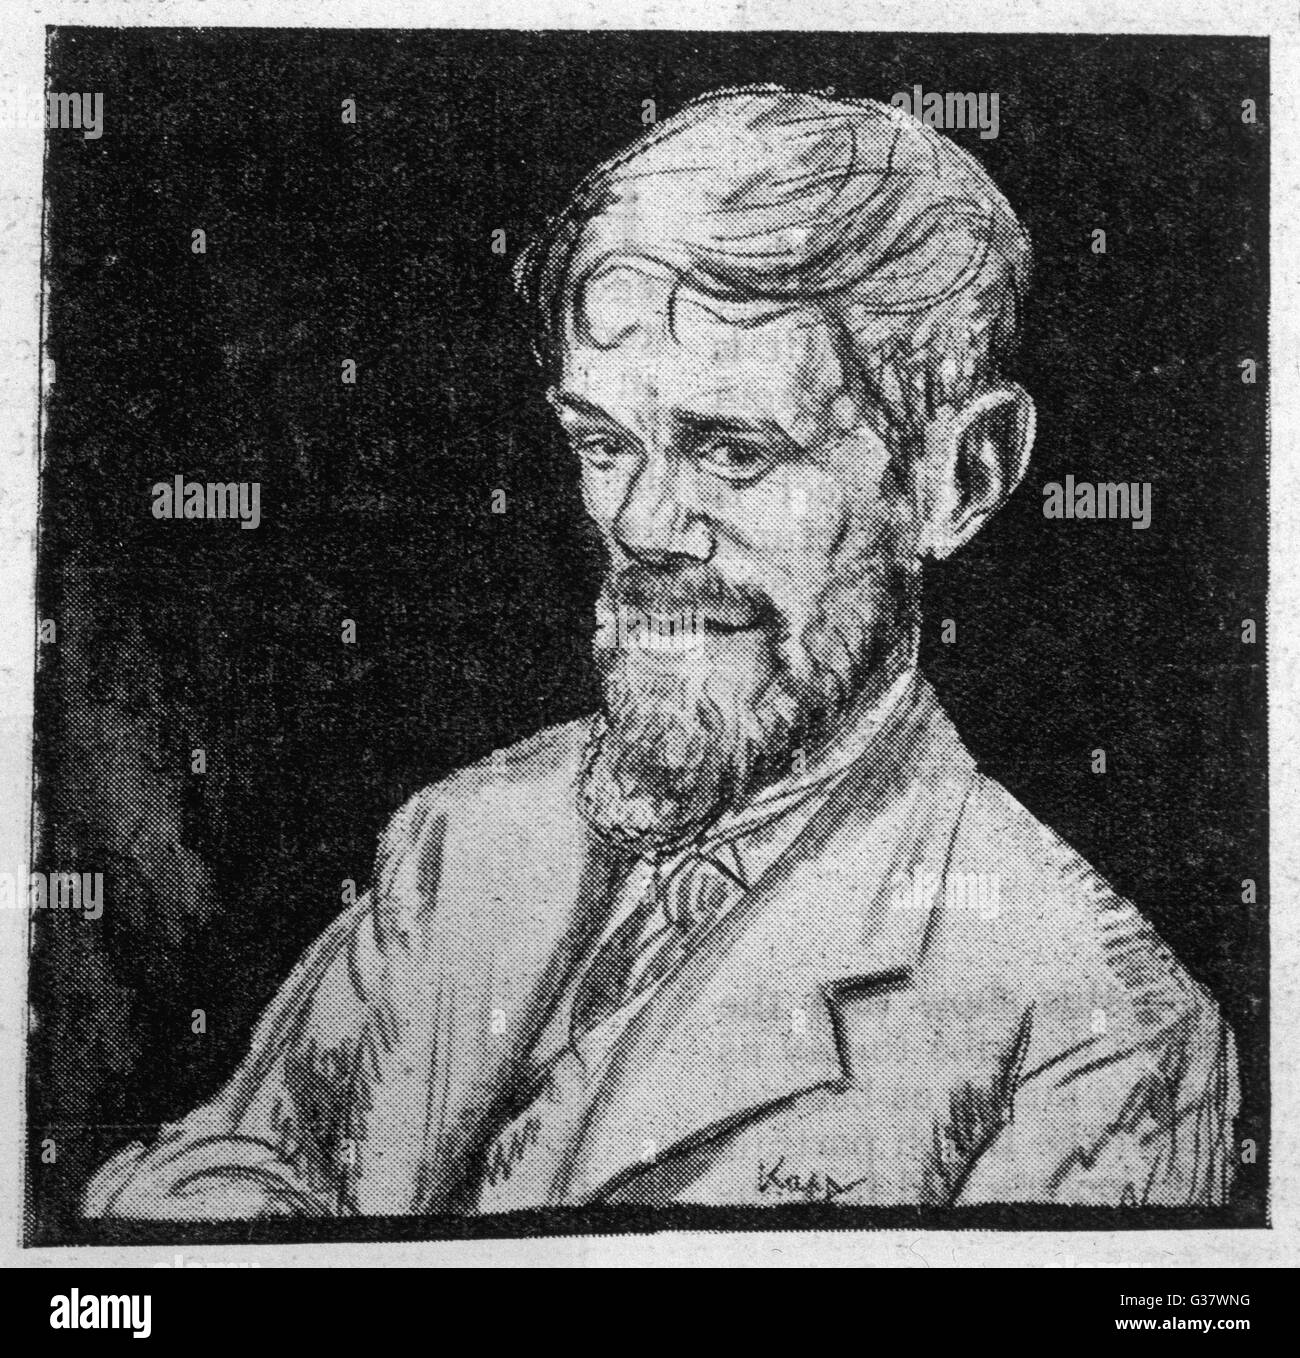 D H LAWRENCE  English novelist  Sketch      Date: 1885 - 1930 Stock Photo